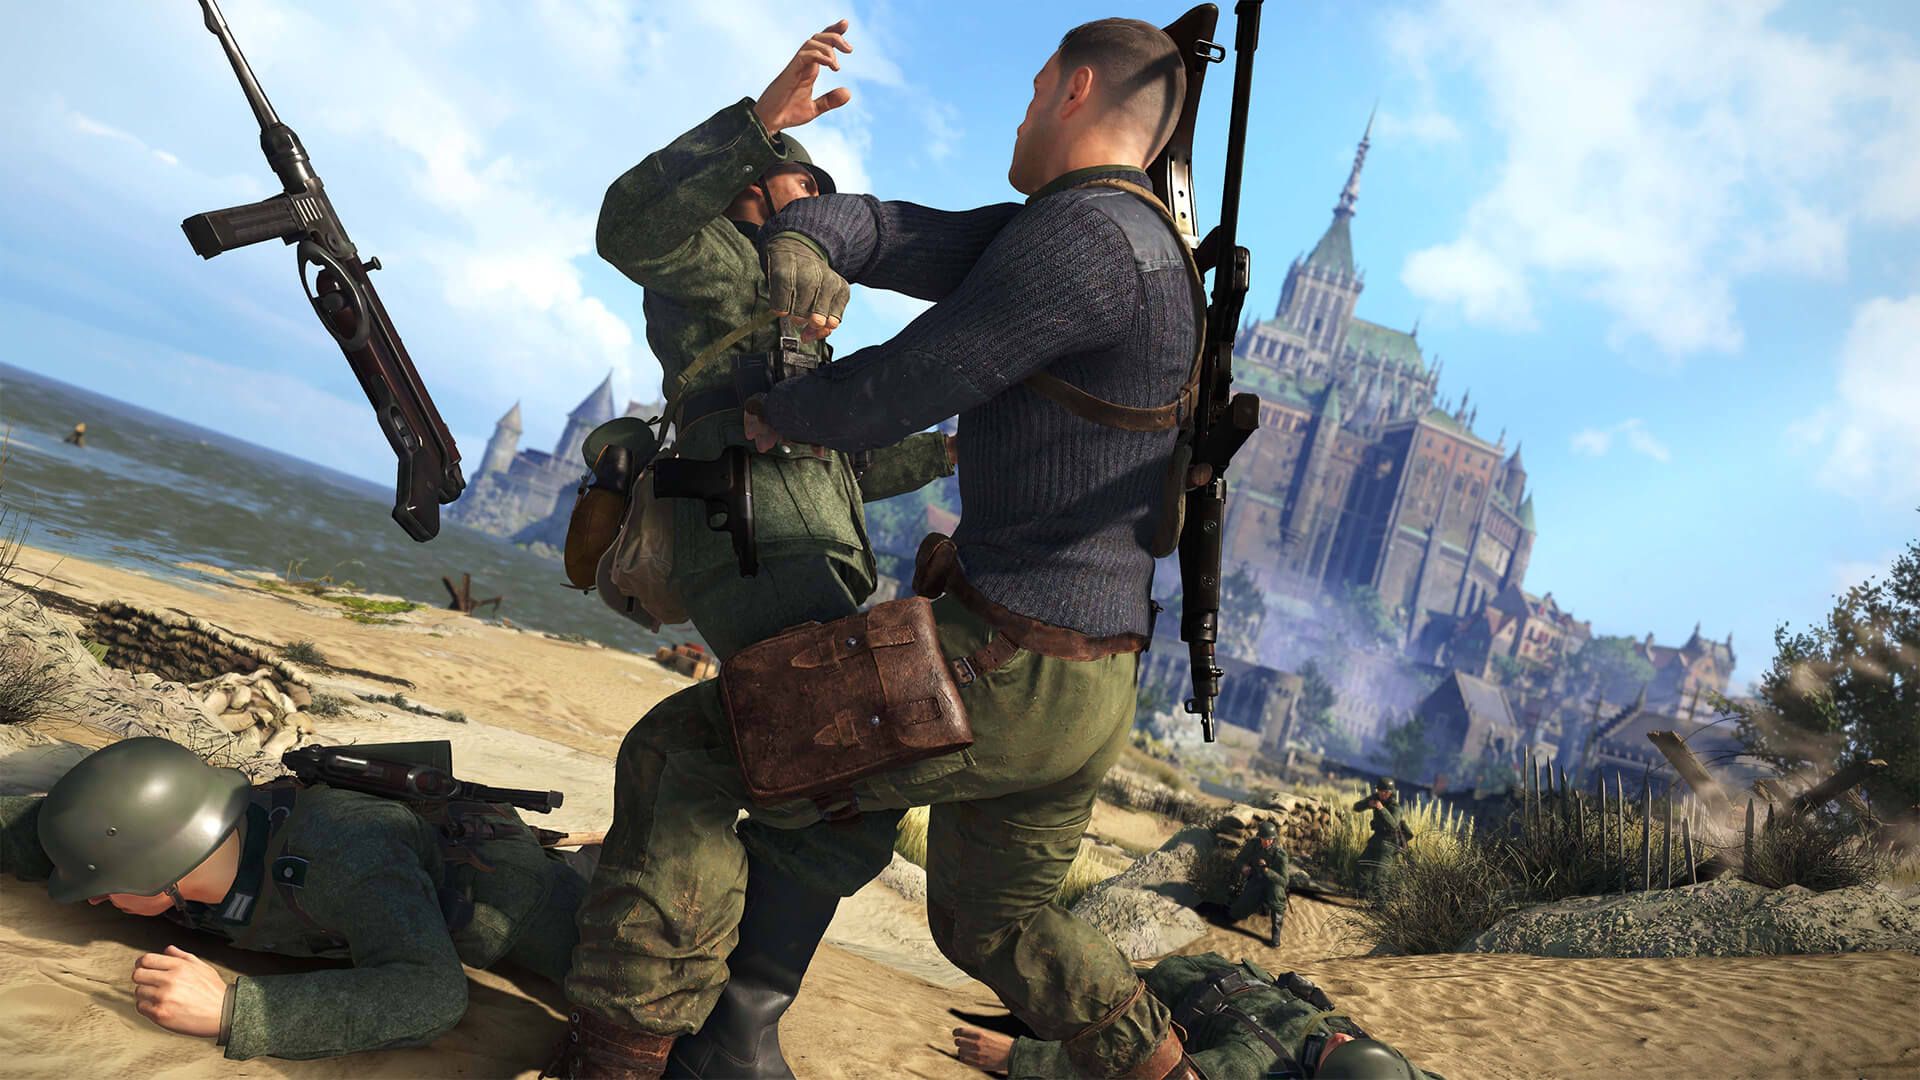 Do you know how long you can beat Sniper Elite 5?  Released last month for PC, PS4, PC5, XOne and XSX/S, Sniper Elite 5 has become one of the most popular games in the series.